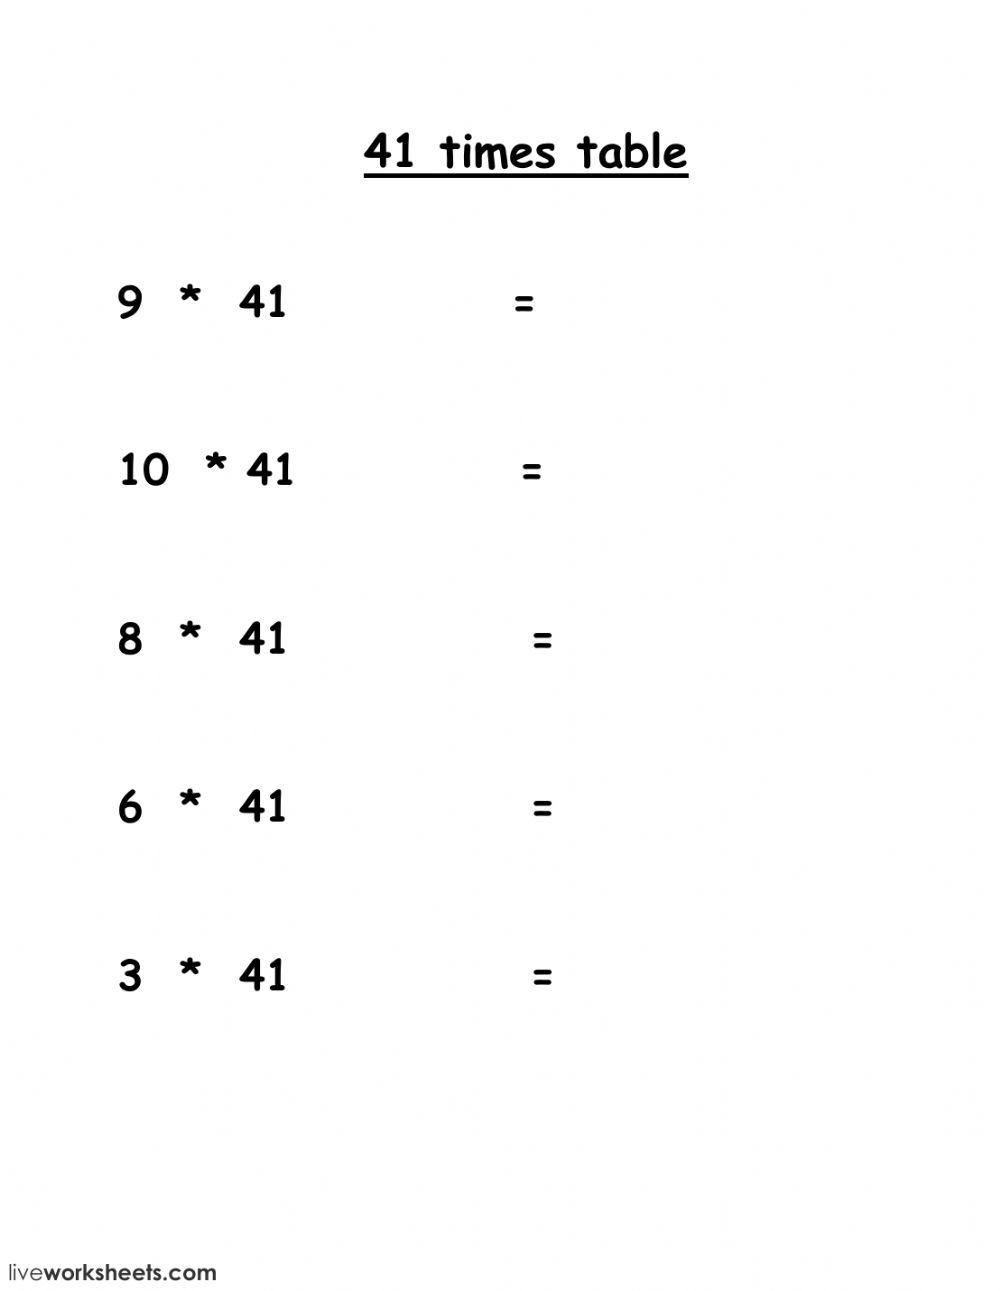 41 times table